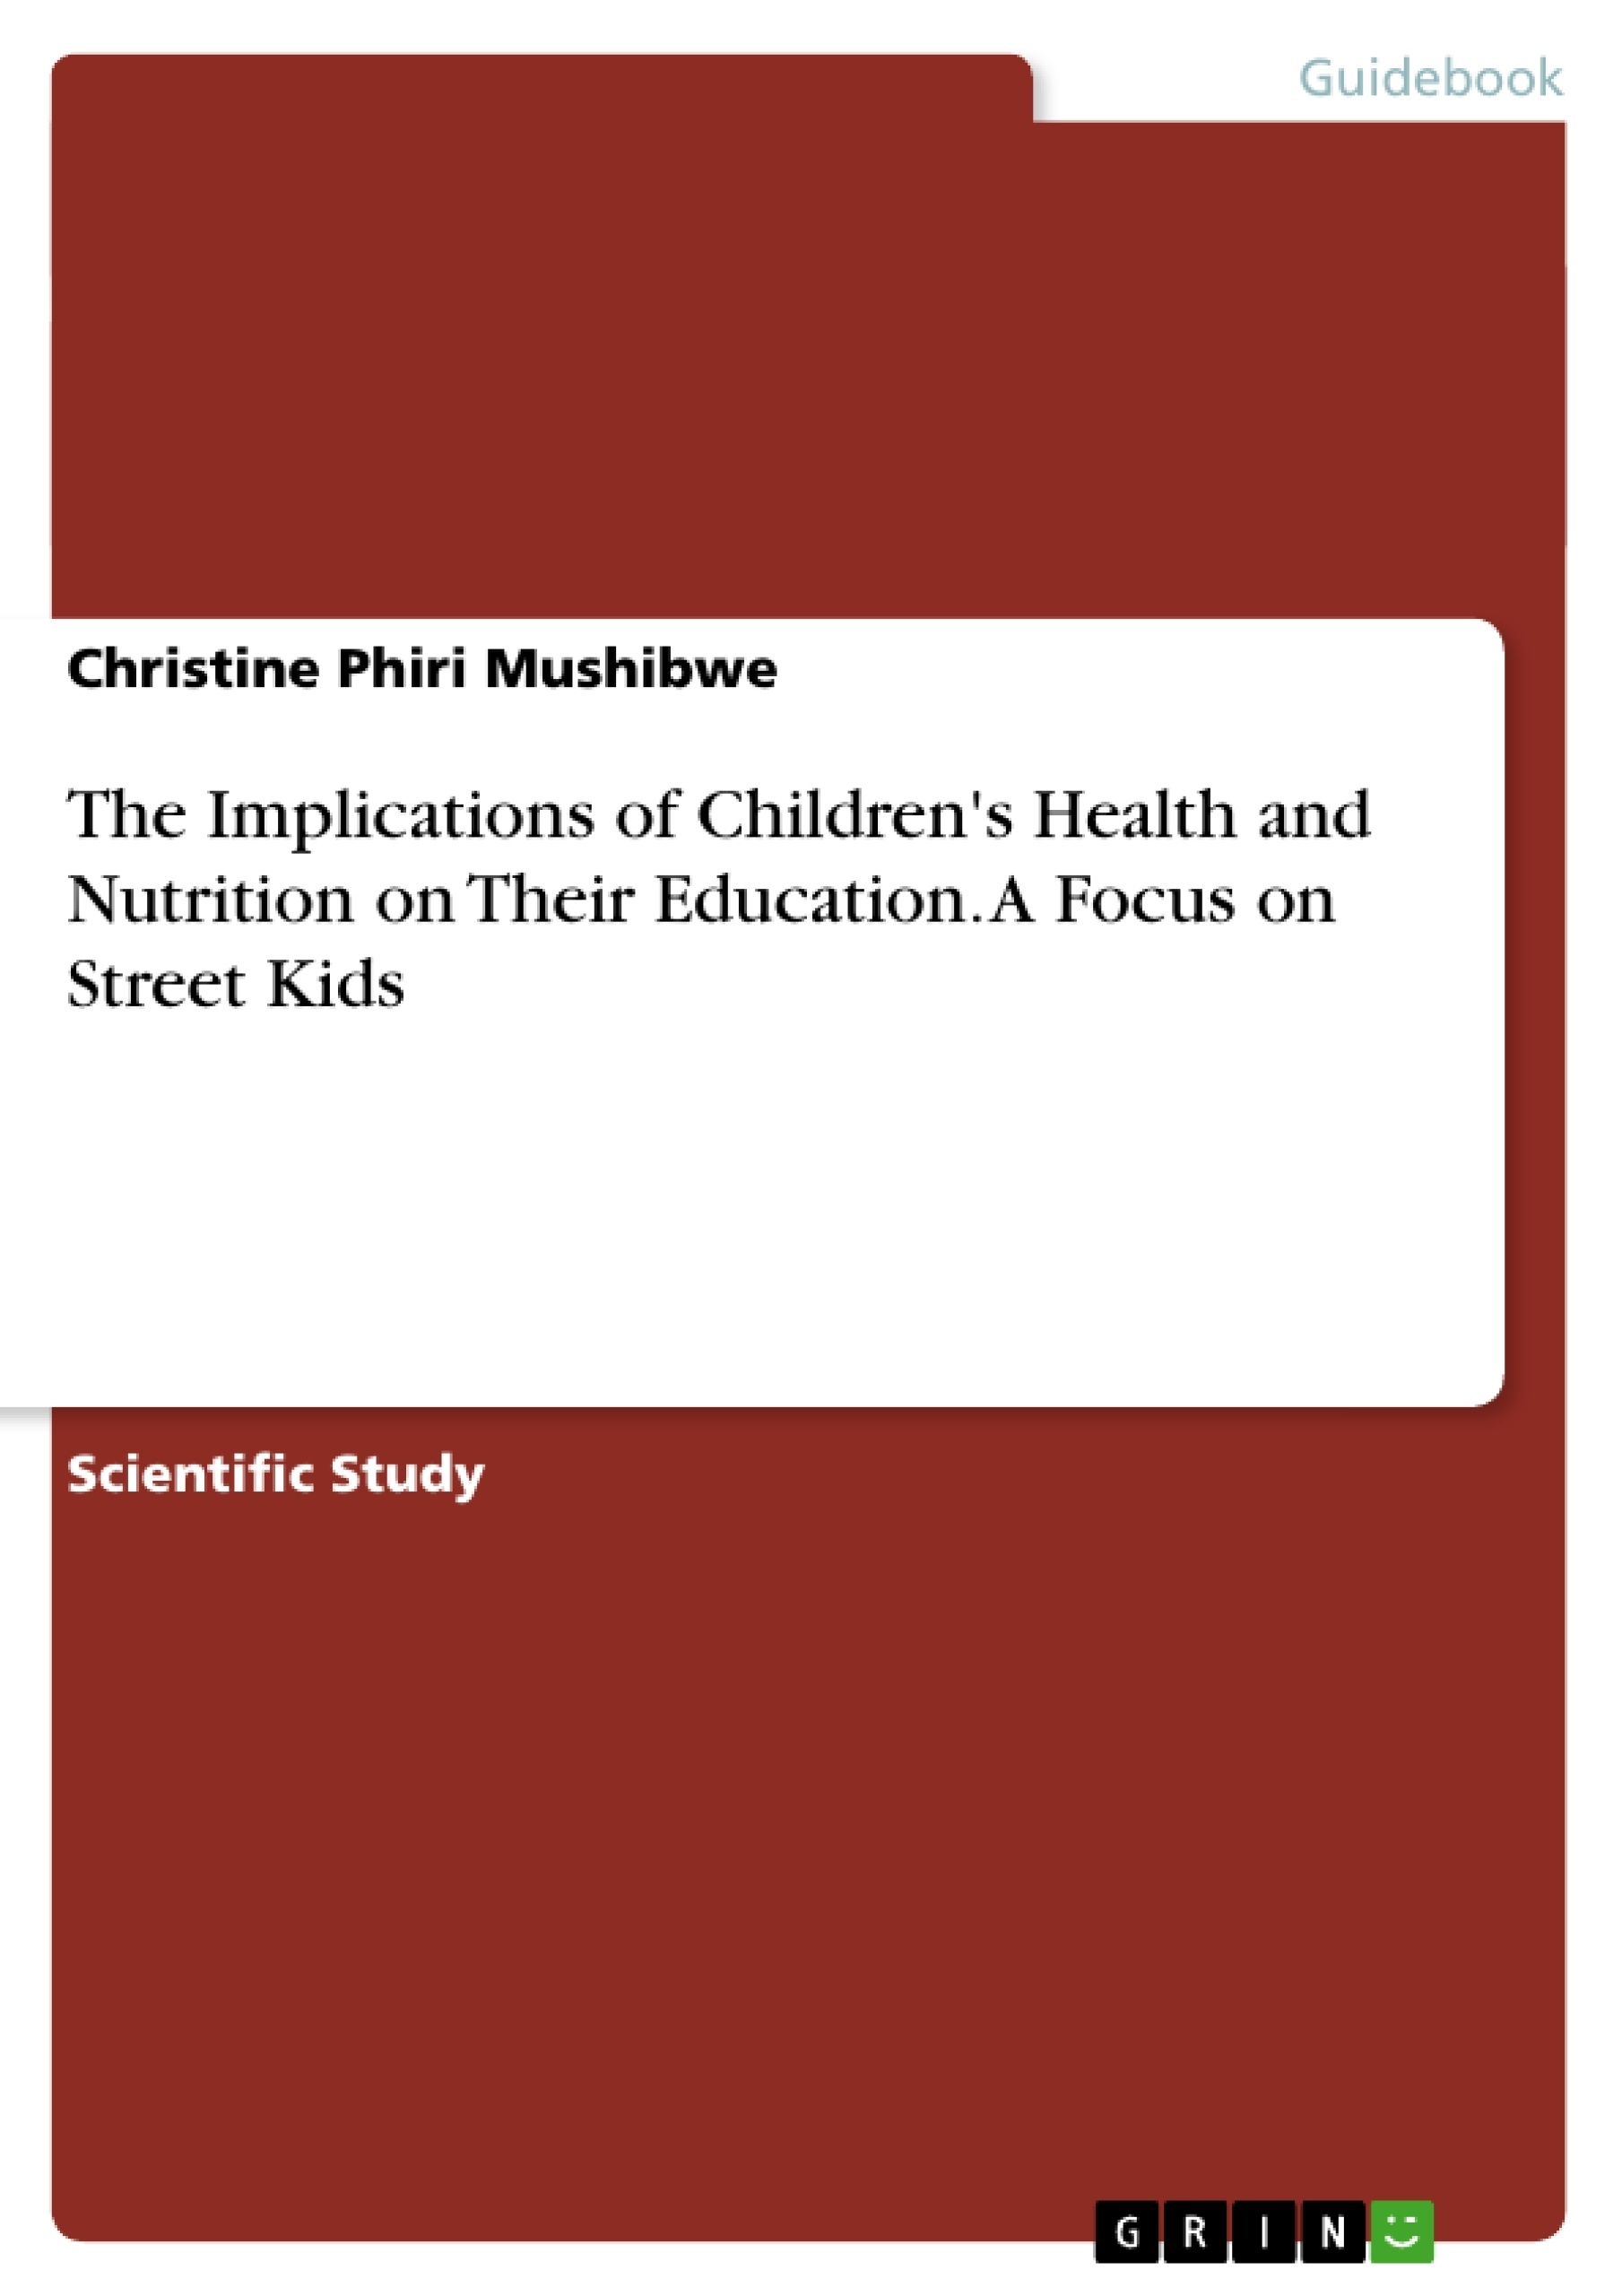 Title: The Implications of Children's Health and Nutrition on Their Education. A Focus on Street Kids